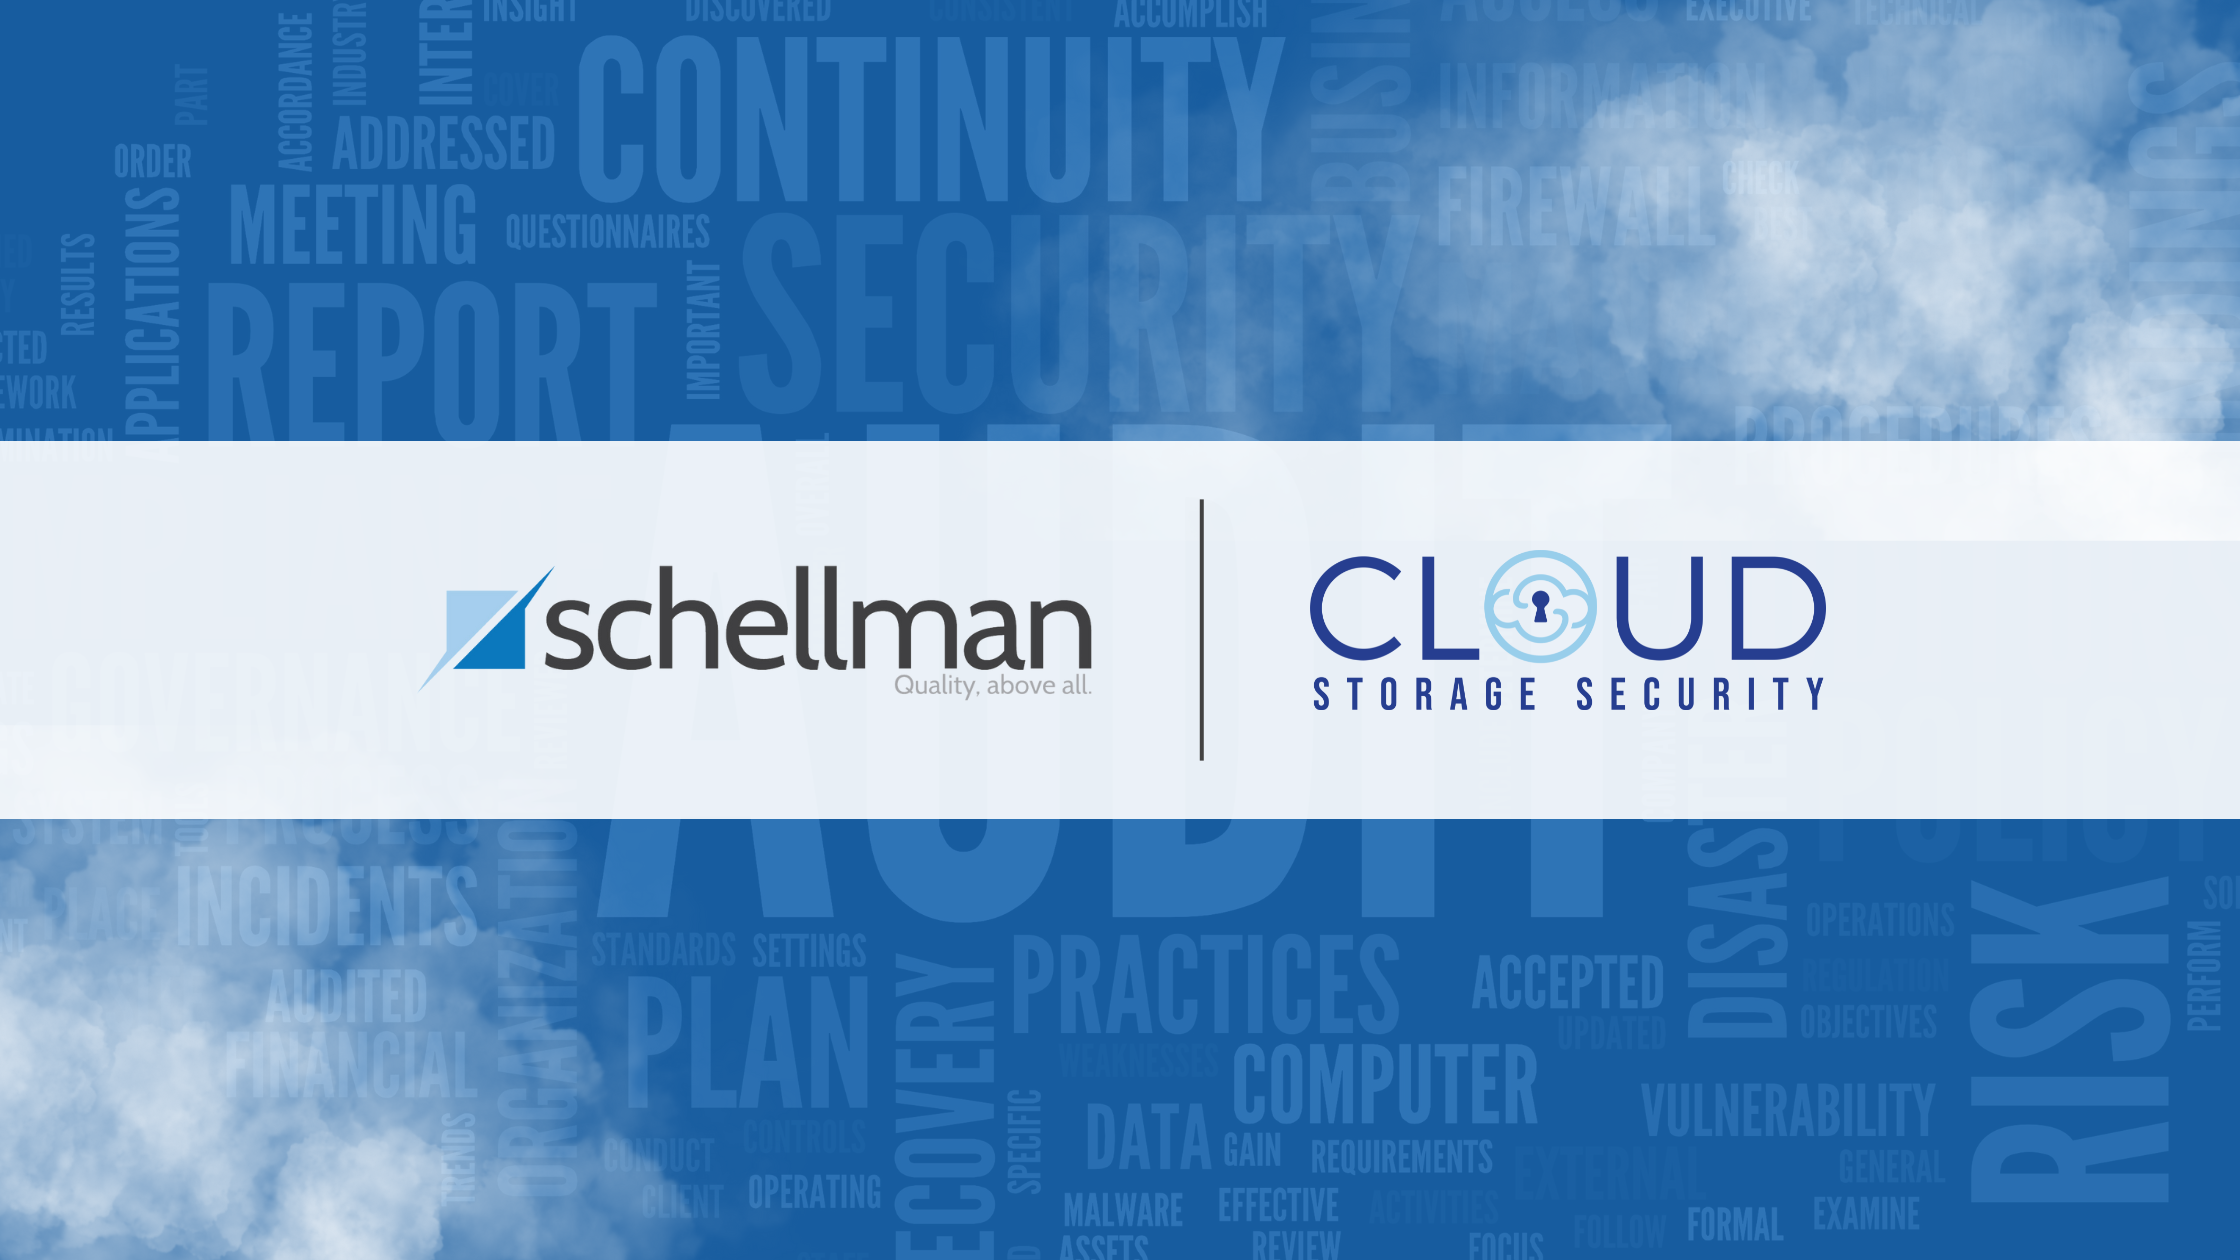 Schellman and CSS logo over a blue background